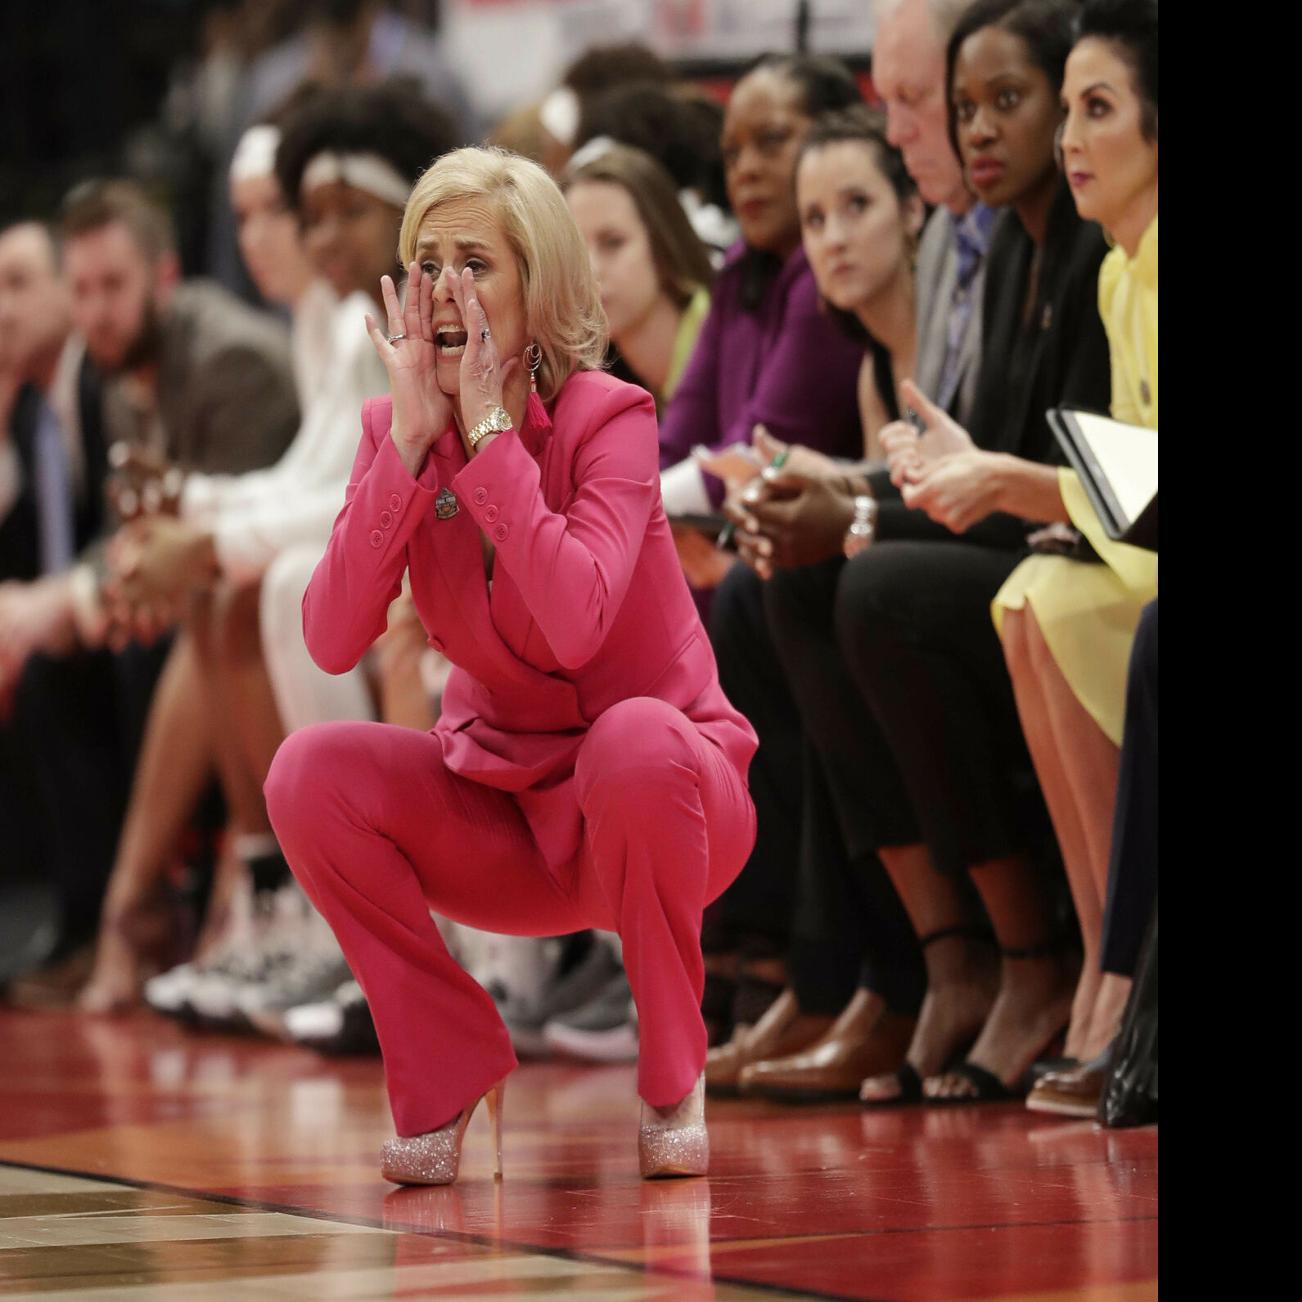 As Nikki Fargas leaves, Kim Mulkey and LSU are in discussions for  blockbuster deal, sources say | LSU 